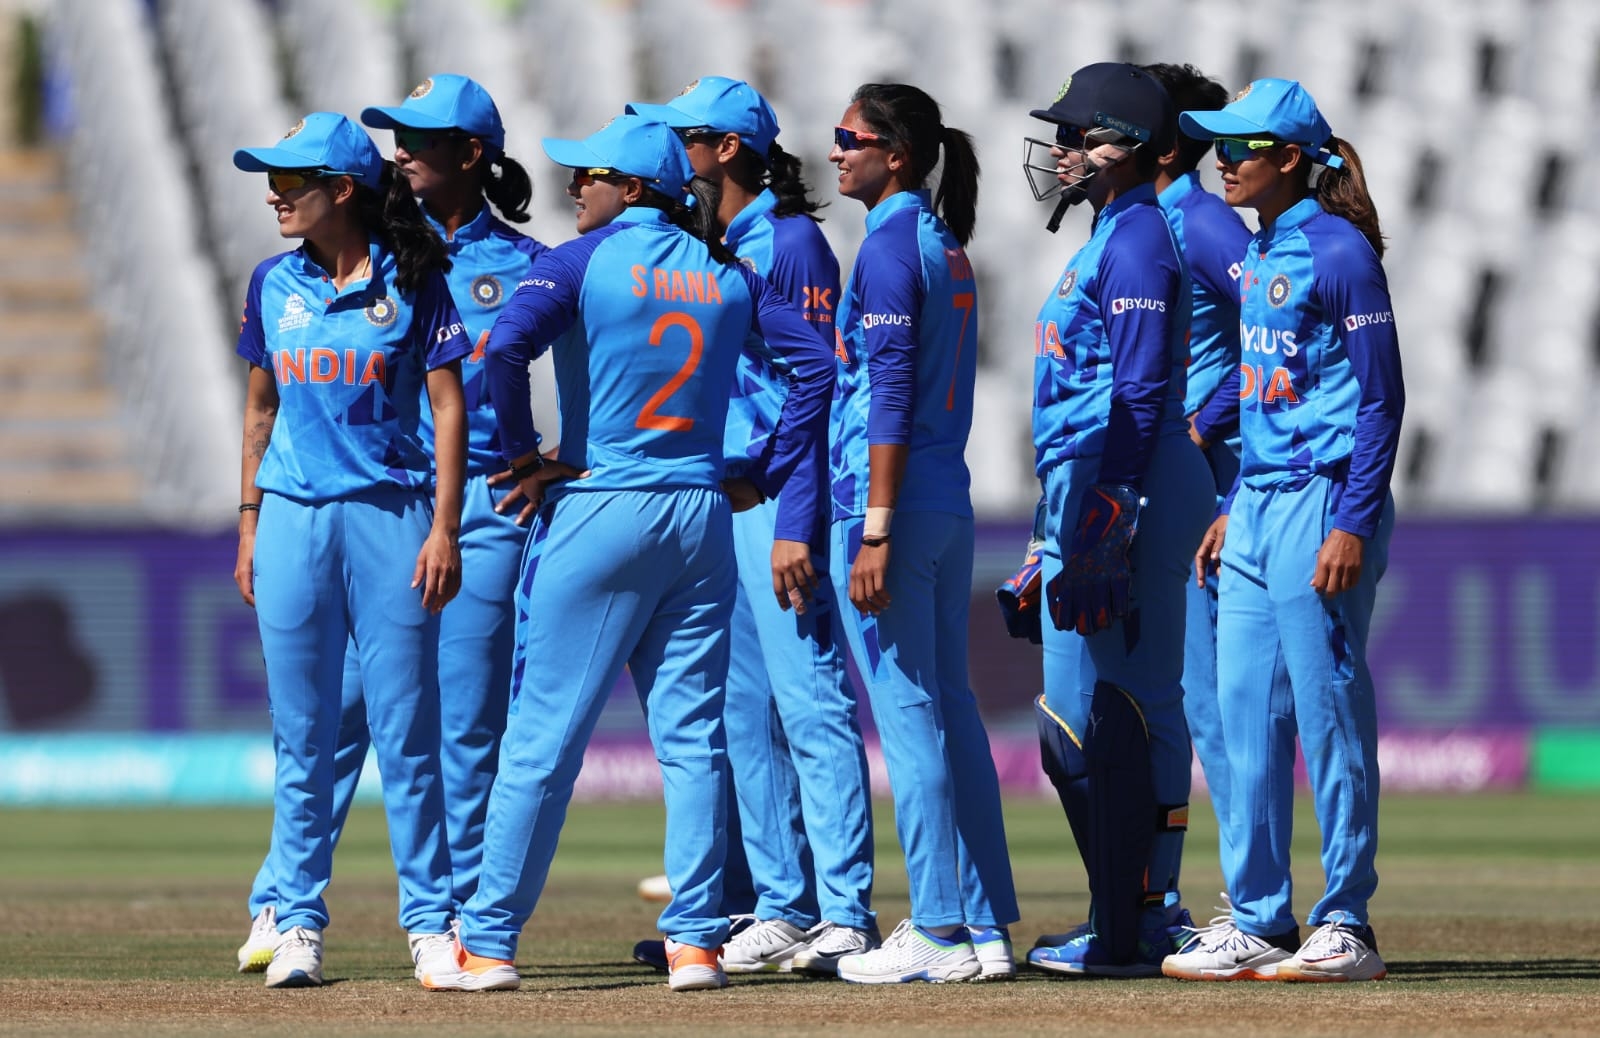 WPL a big step forward to professionalise Indian women's cricket.